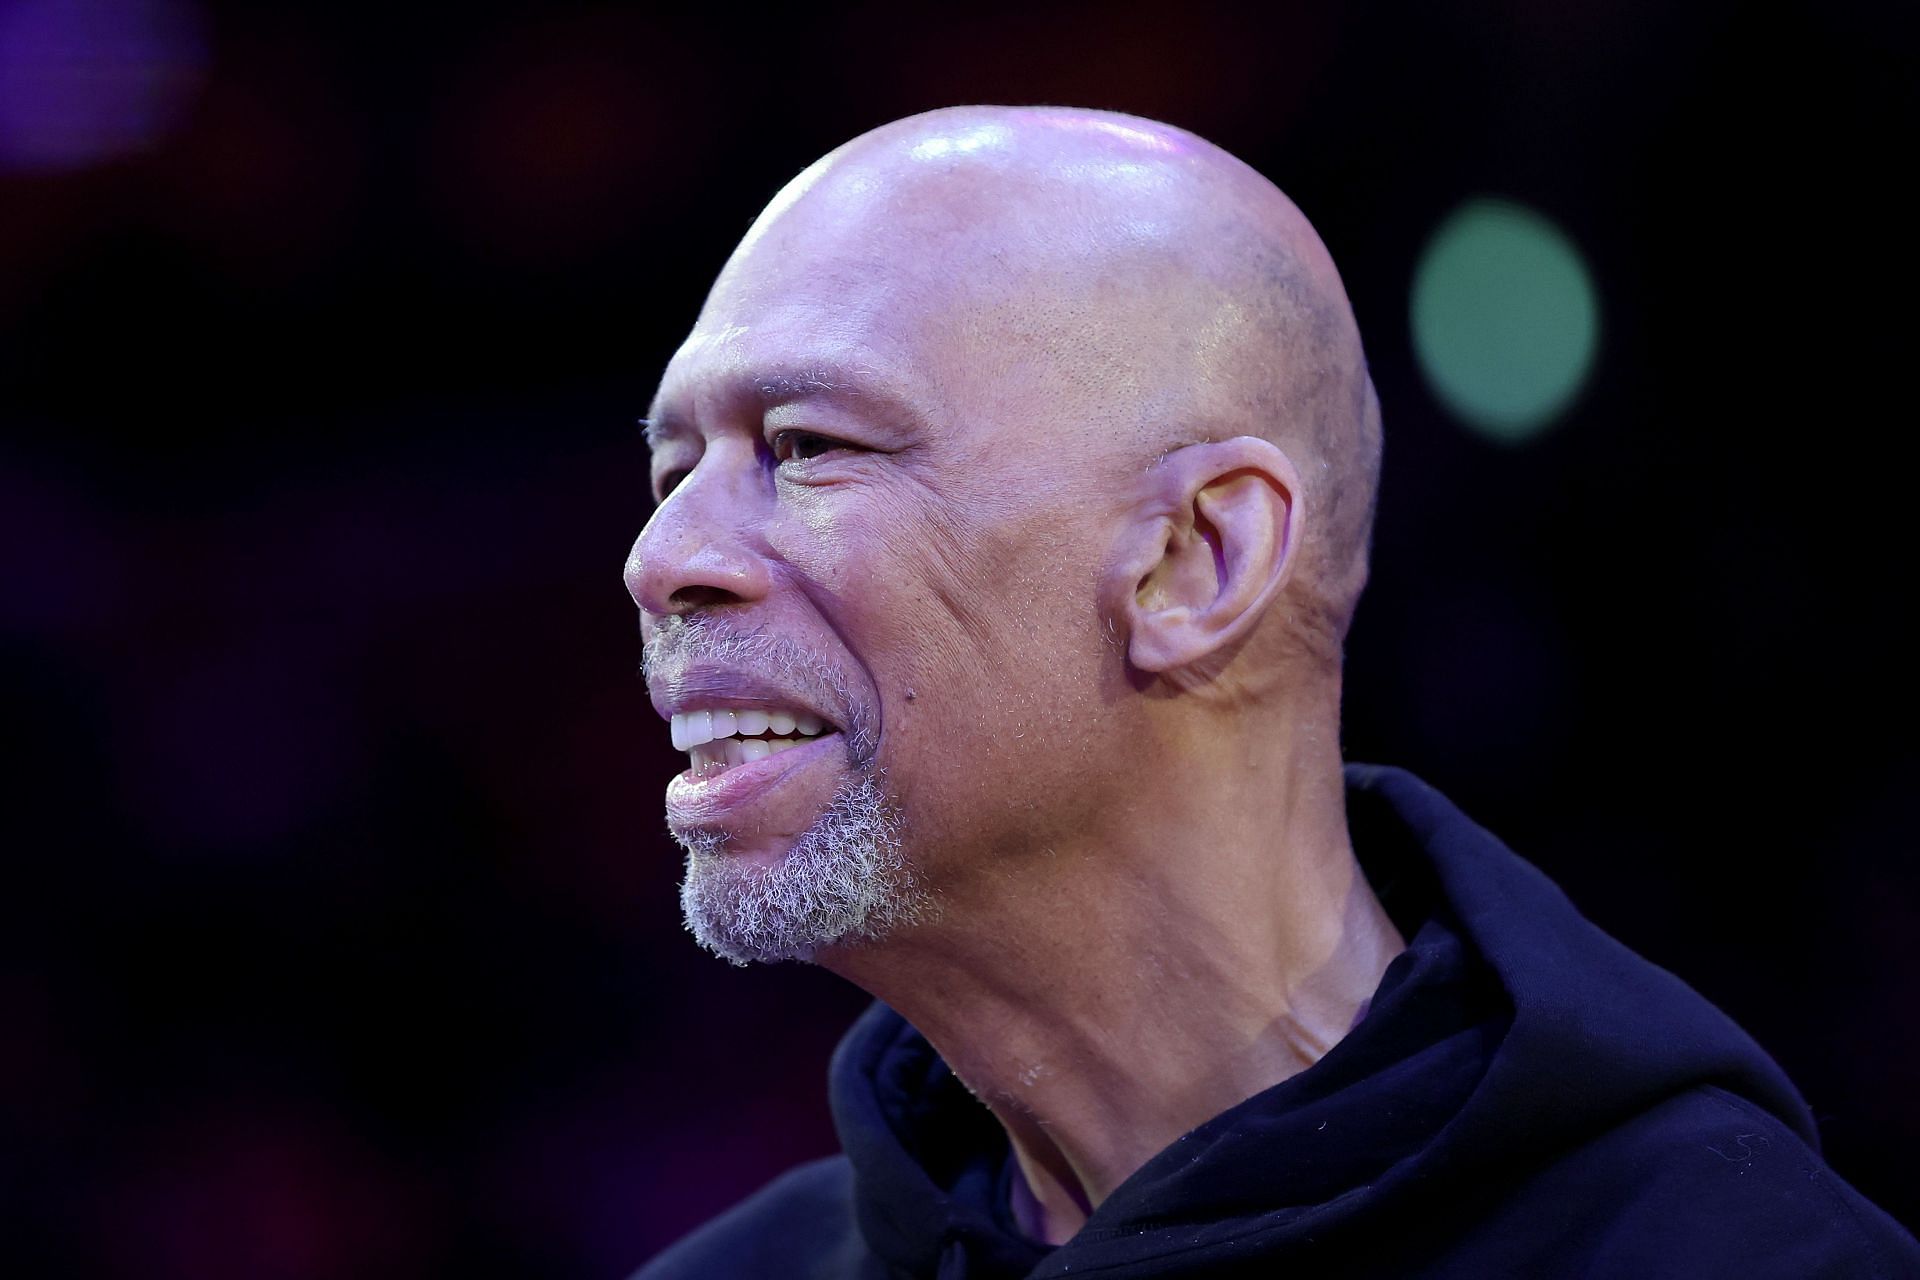 Kareem Abdul-Jabbar was relieved that LeBron James would finally hold the all-time scoring record.